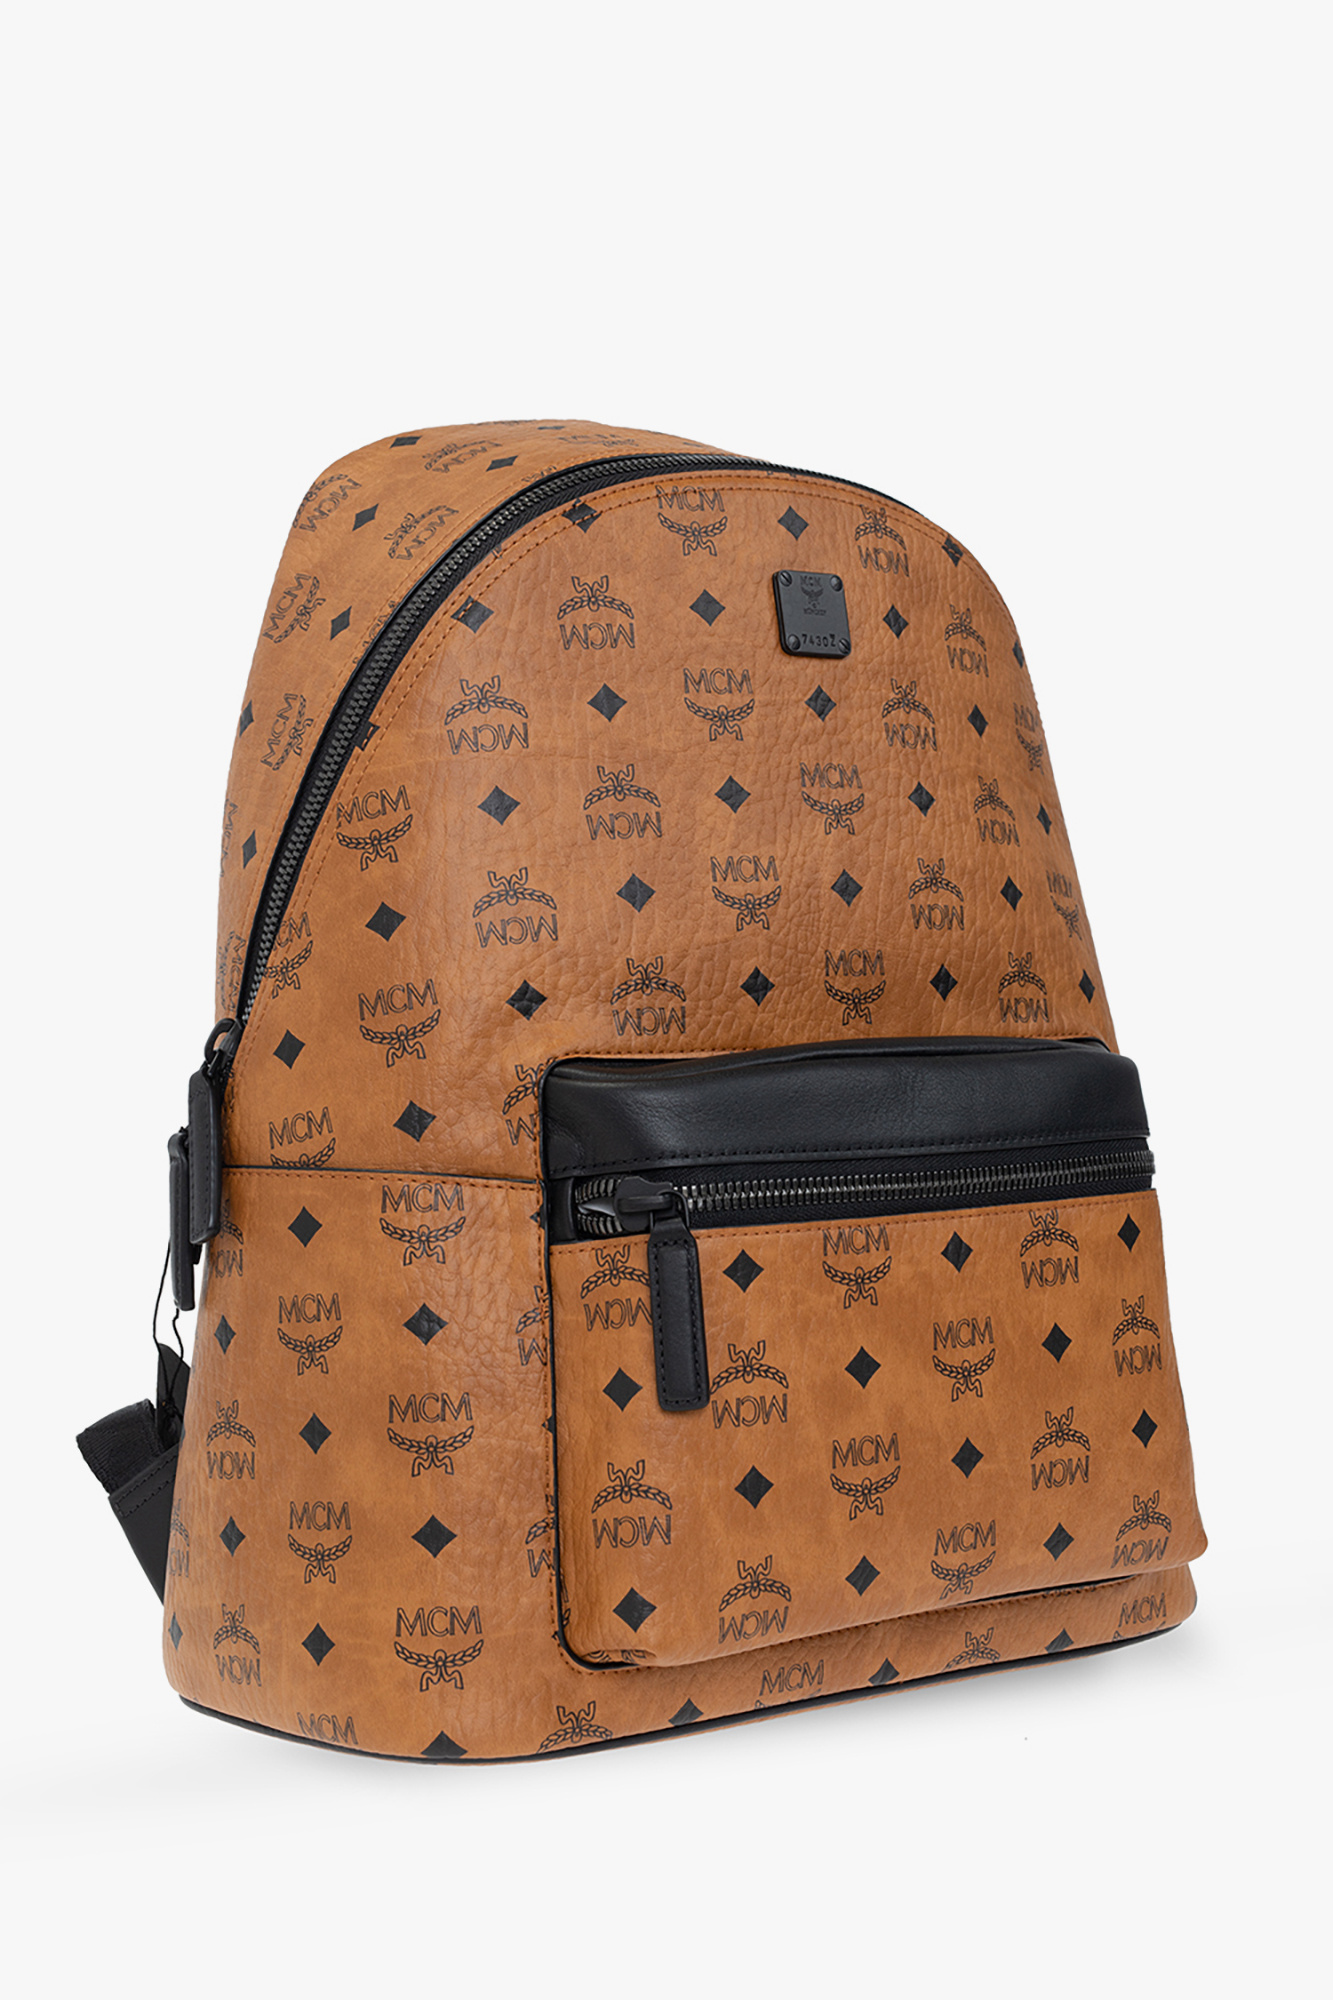 MCM backpack edition with logo